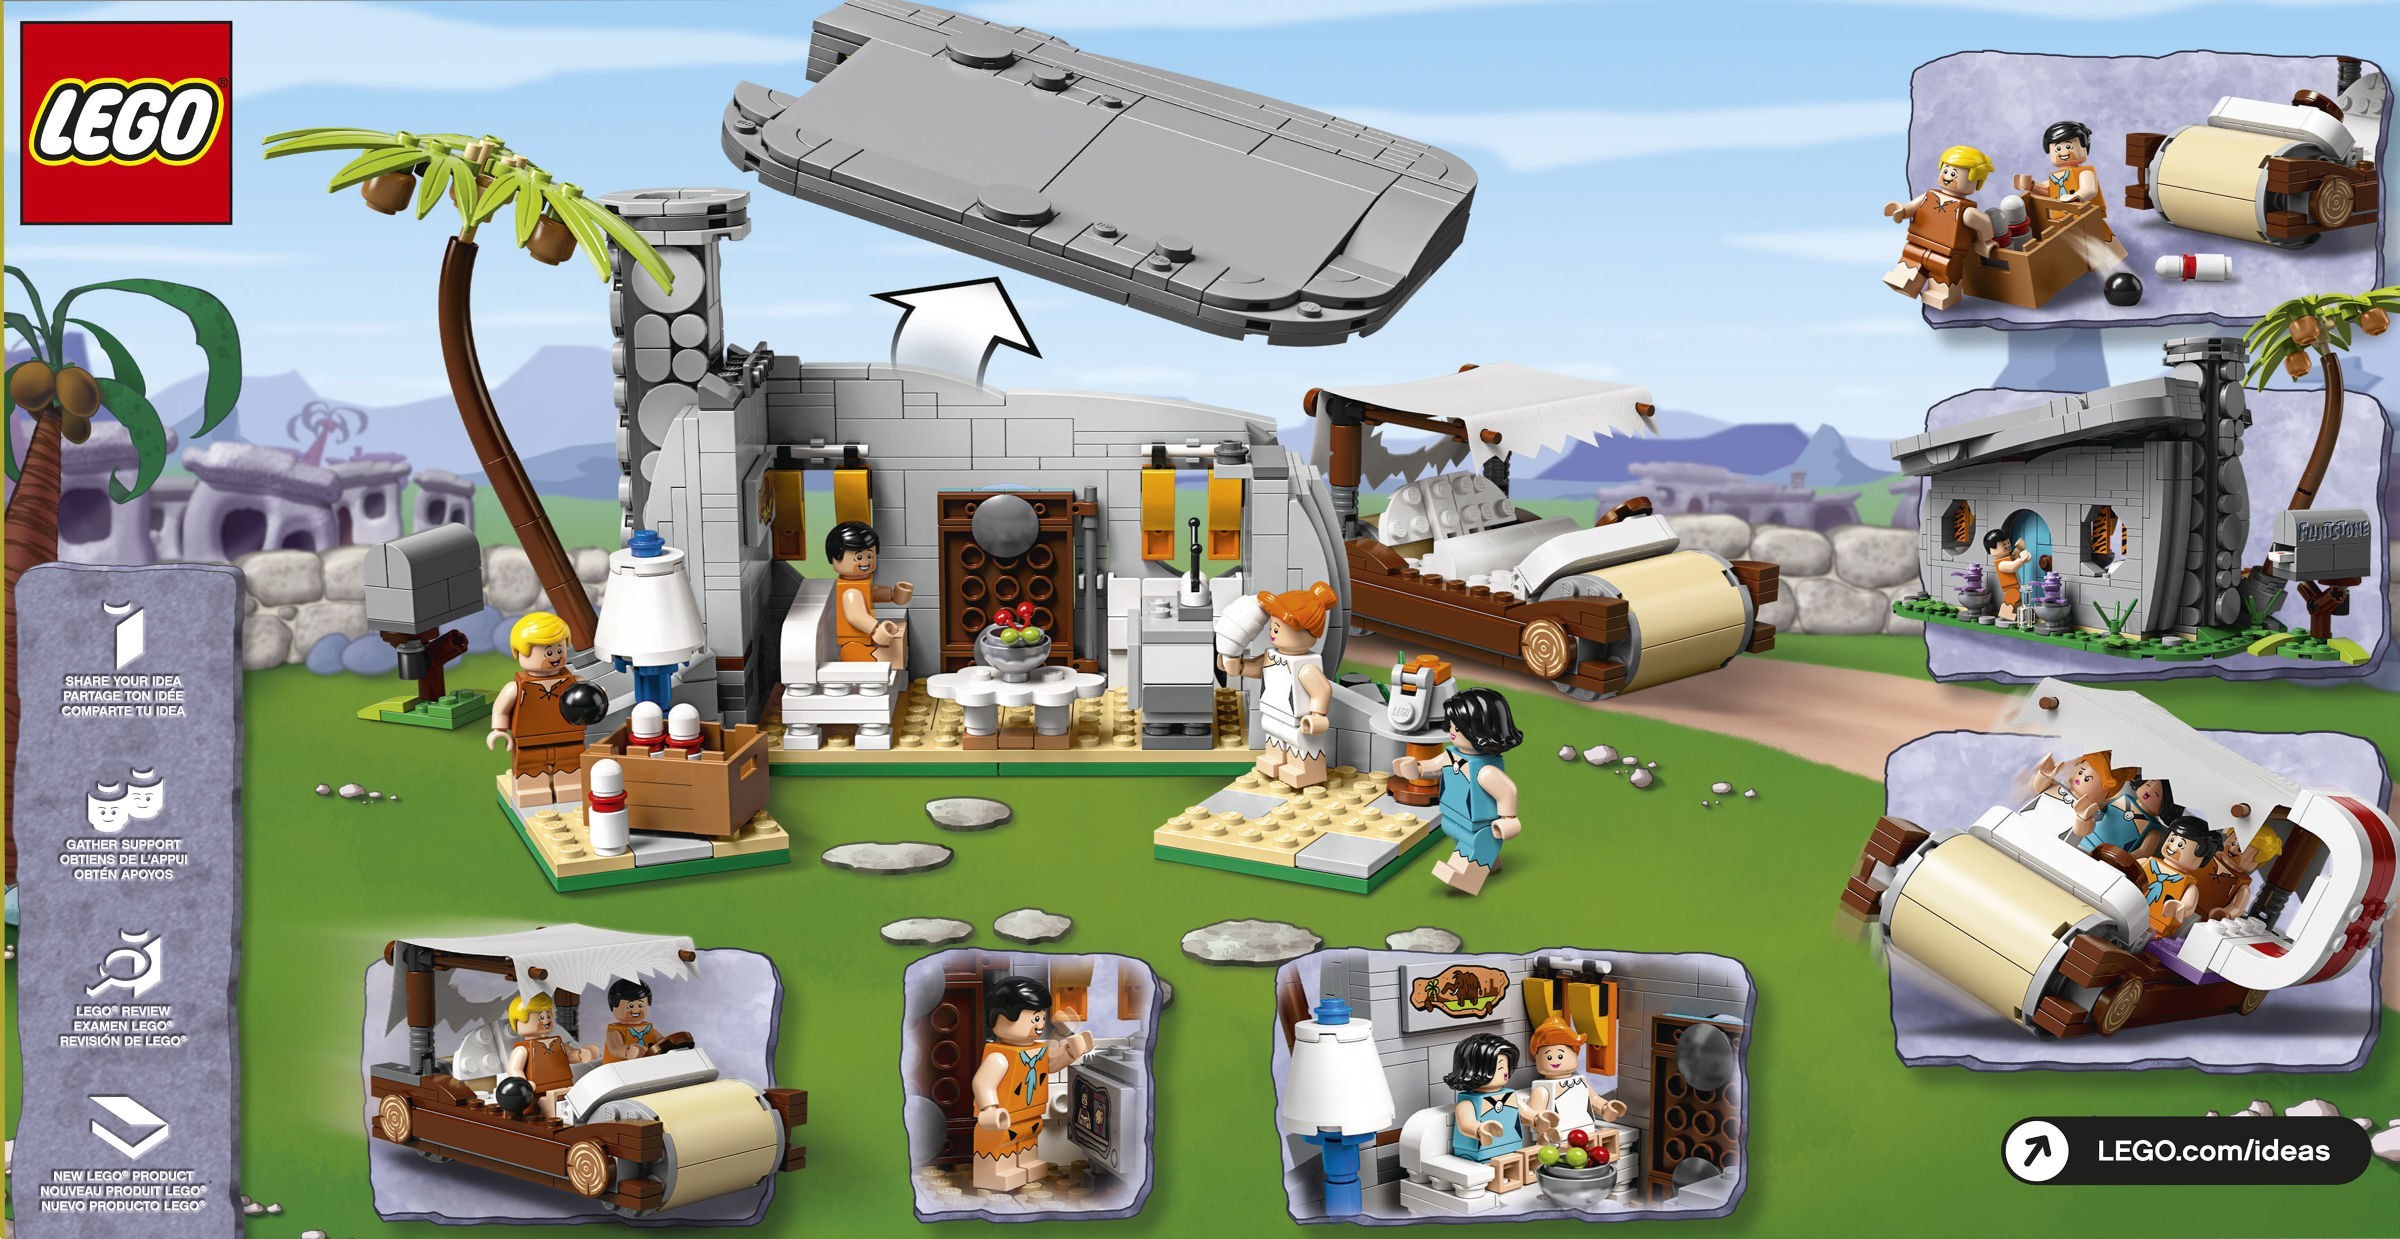 Go back to Bedrock with 21316 The Flintstones, the newest LEGO